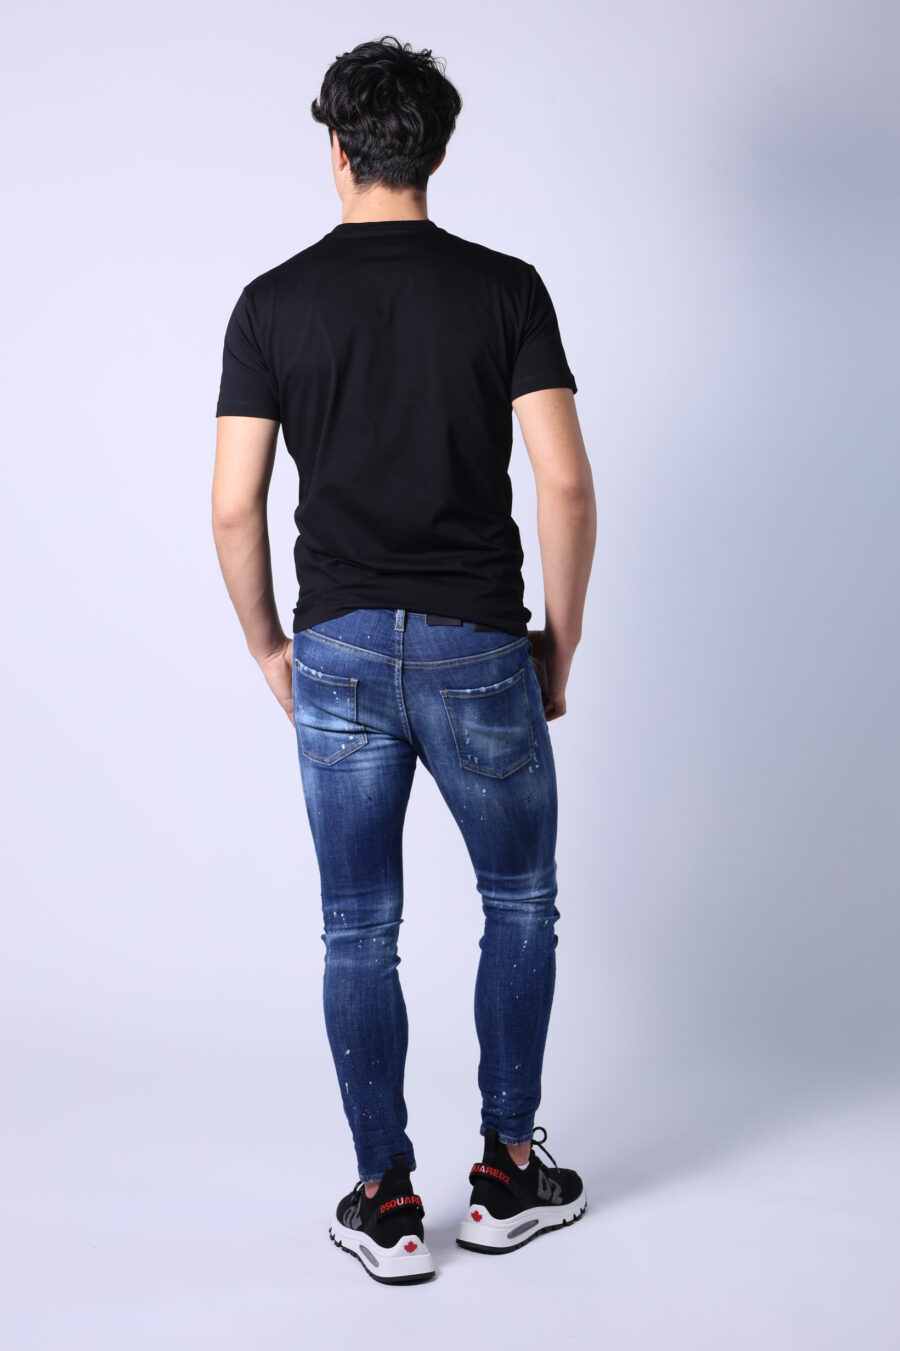 Blue "skater jean" jeans with rips and frayed - Untitled Catalog 05290